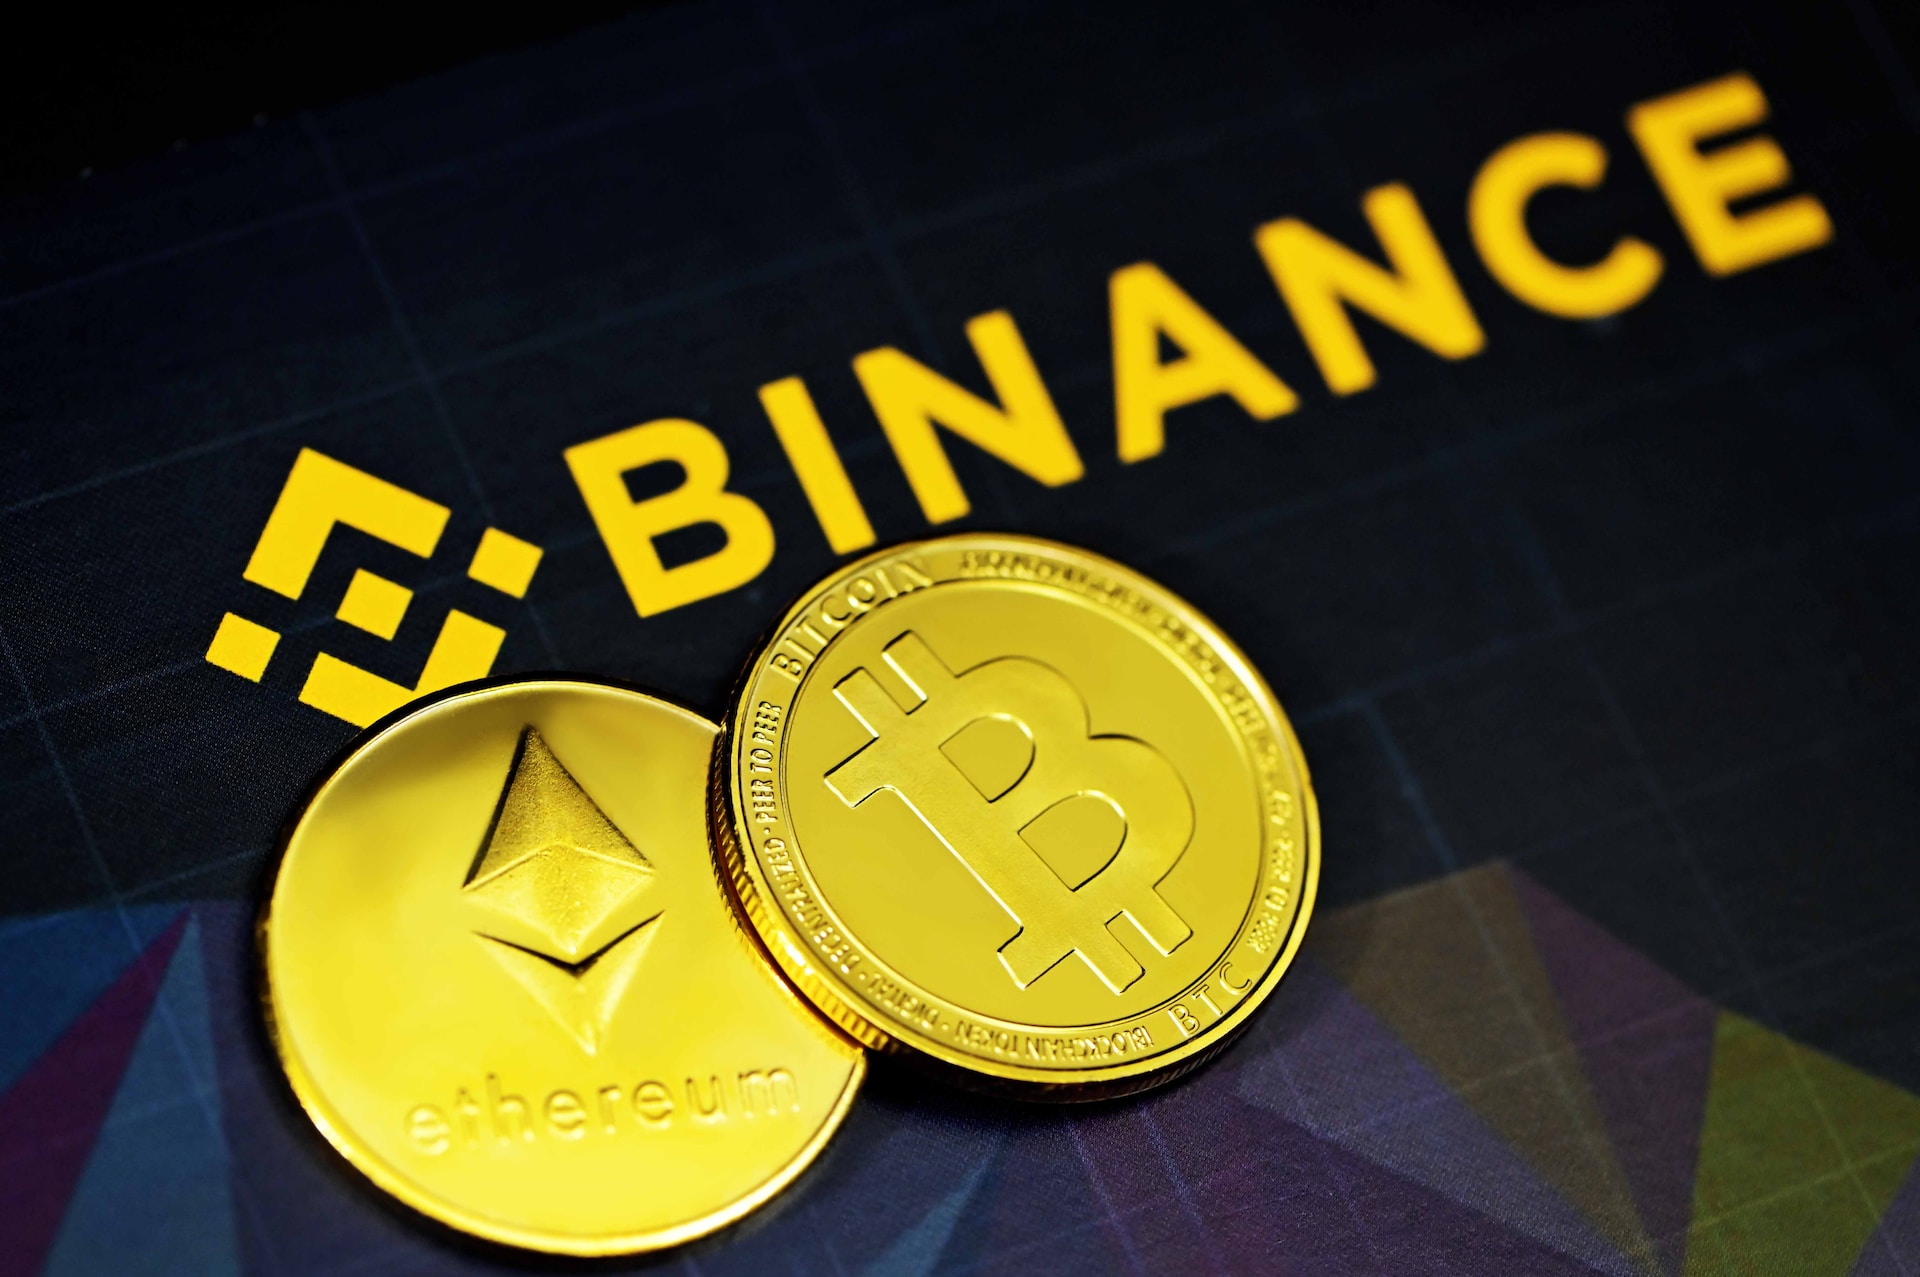 Binance US Loses Key Executives as Regulatory Issues Intensify – Here's the Latest